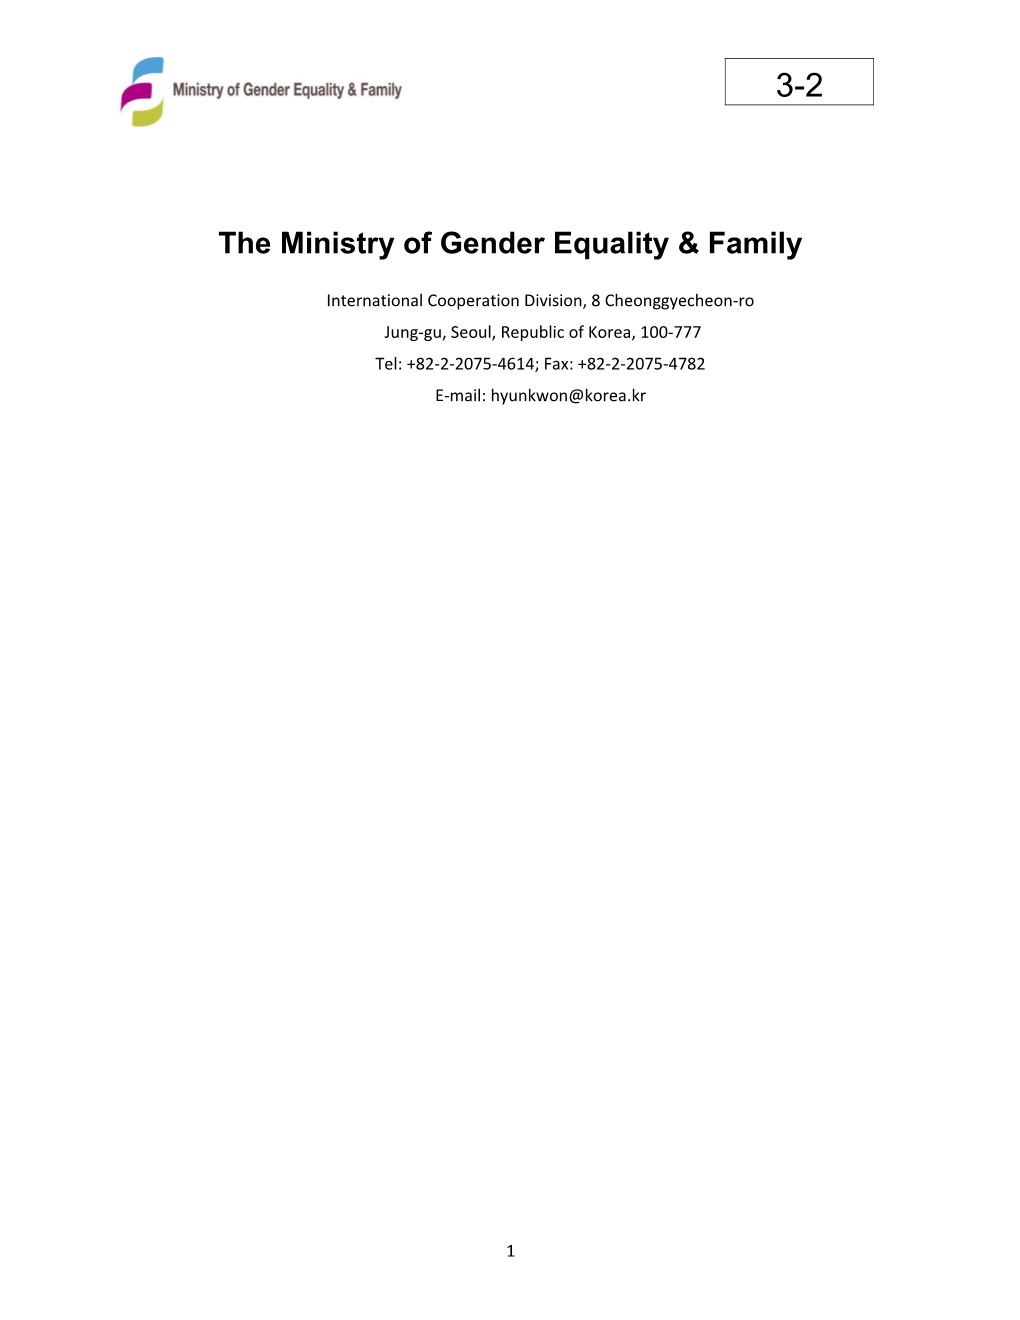 The Ministry of Gender Equality & Family